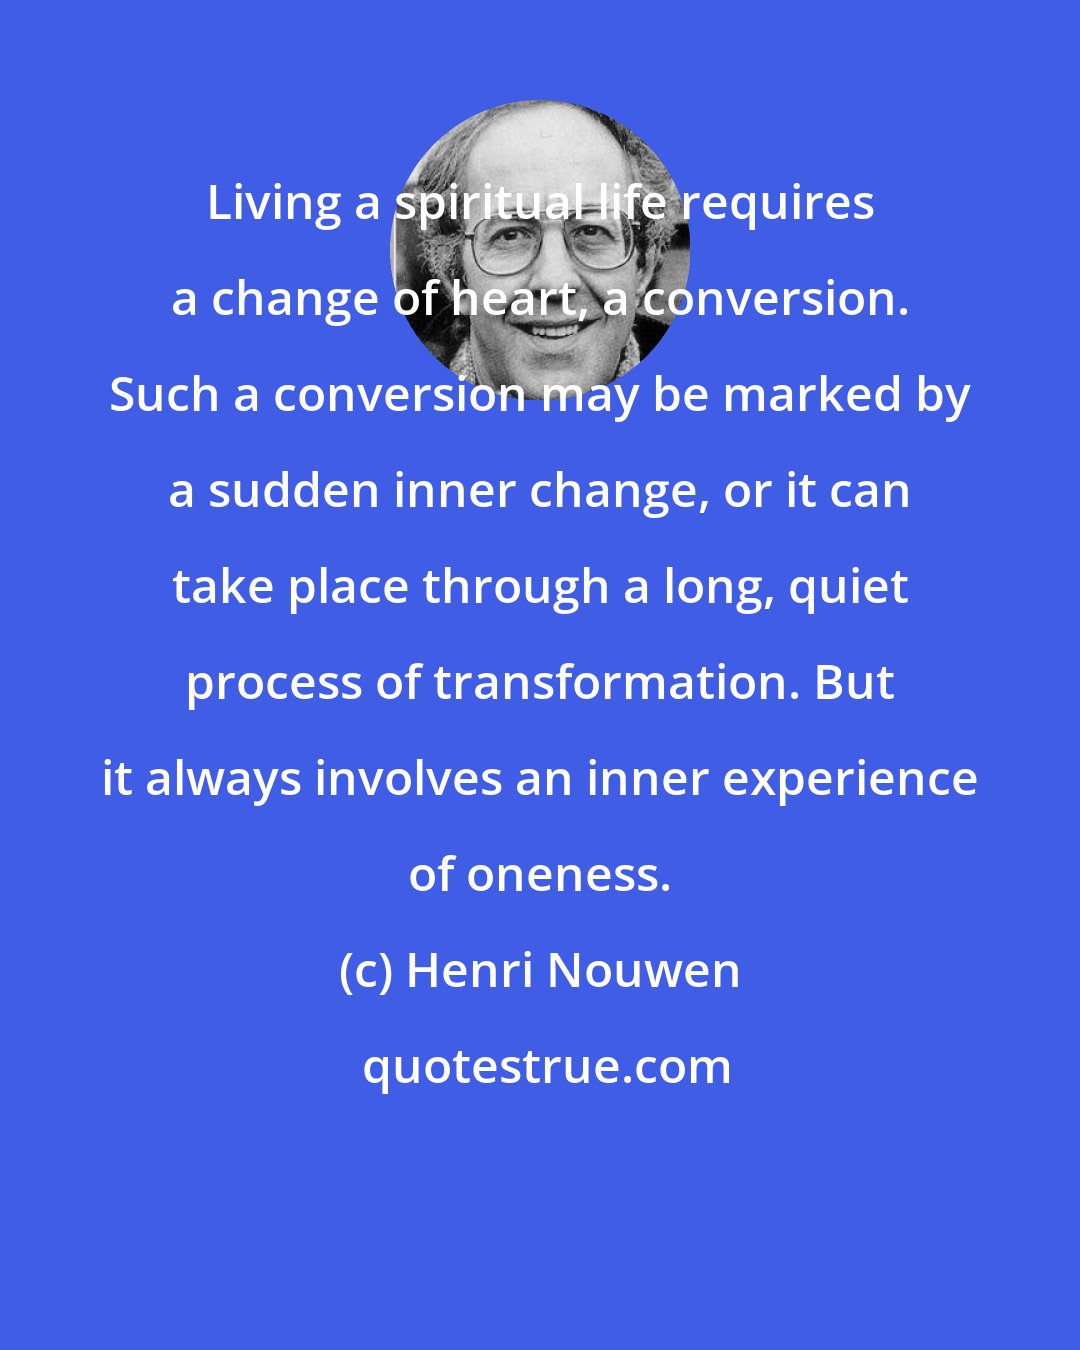 Henri Nouwen: Living a spiritual life requires a change of heart, a conversion. Such a conversion may be marked by a sudden inner change, or it can take place through a long, quiet process of transformation. But it always involves an inner experience of oneness.